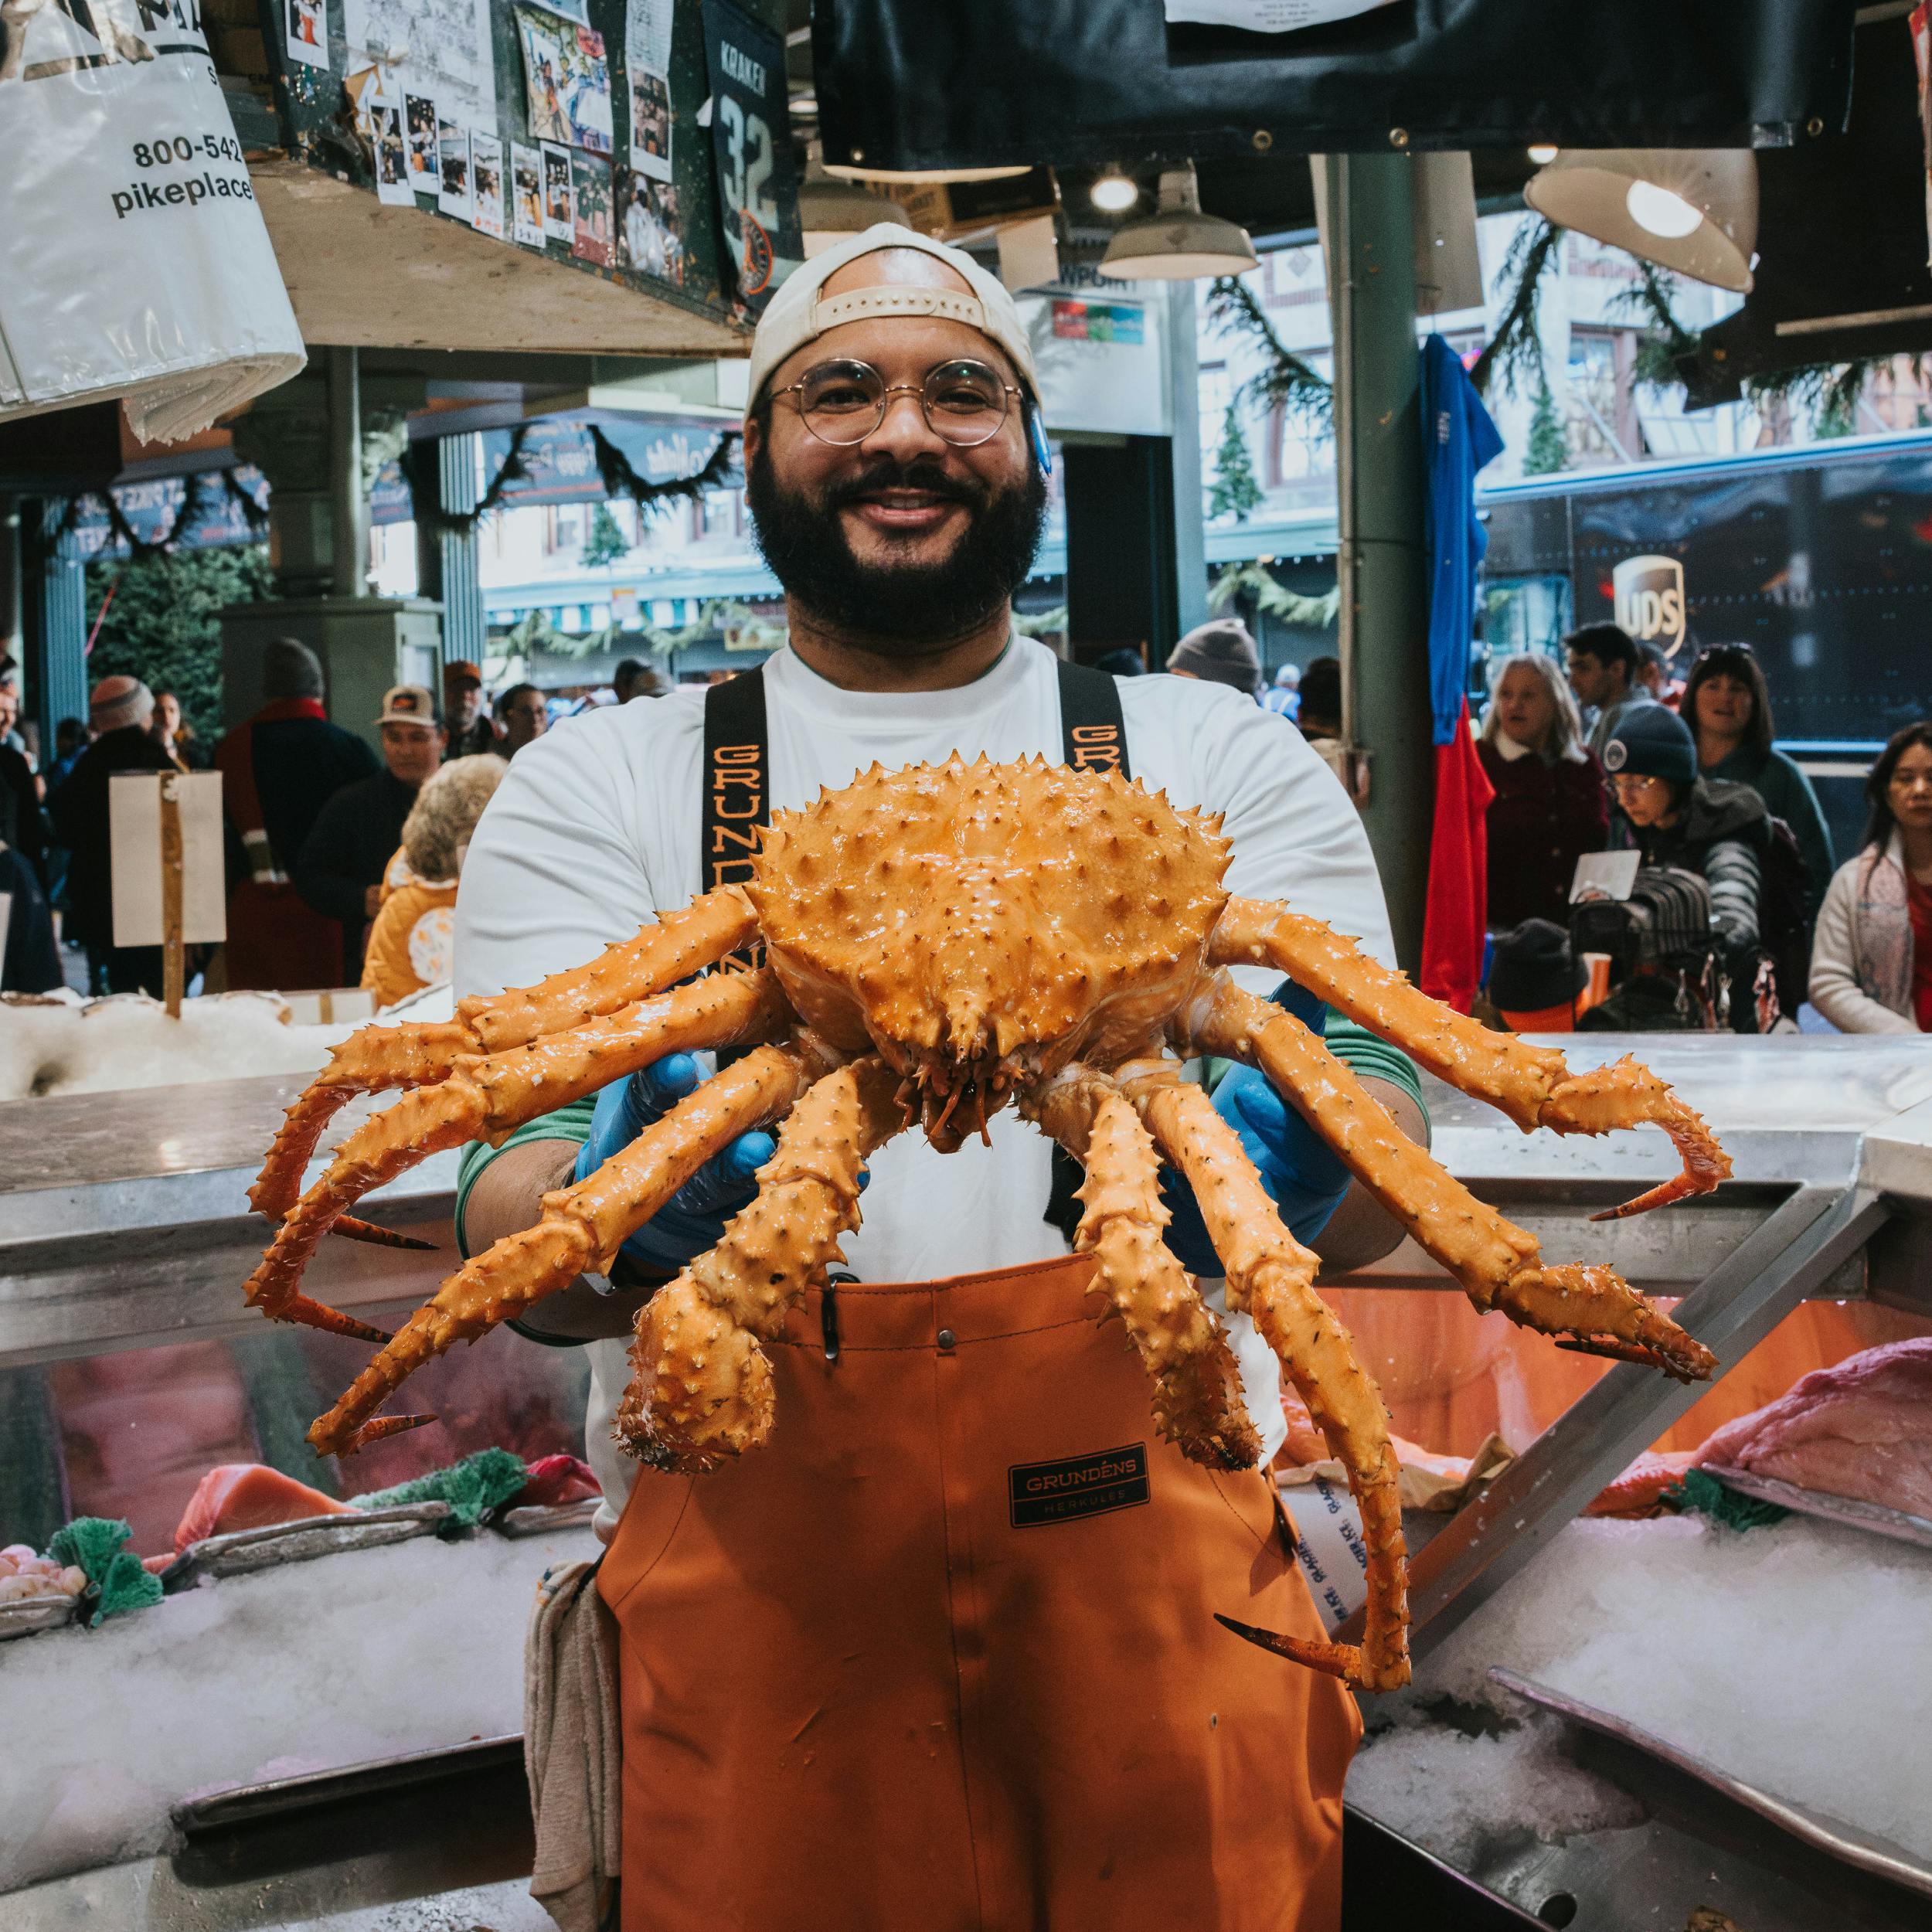 Whole Alaskan King Crab by Pike Place Fish Market - Goldbelly